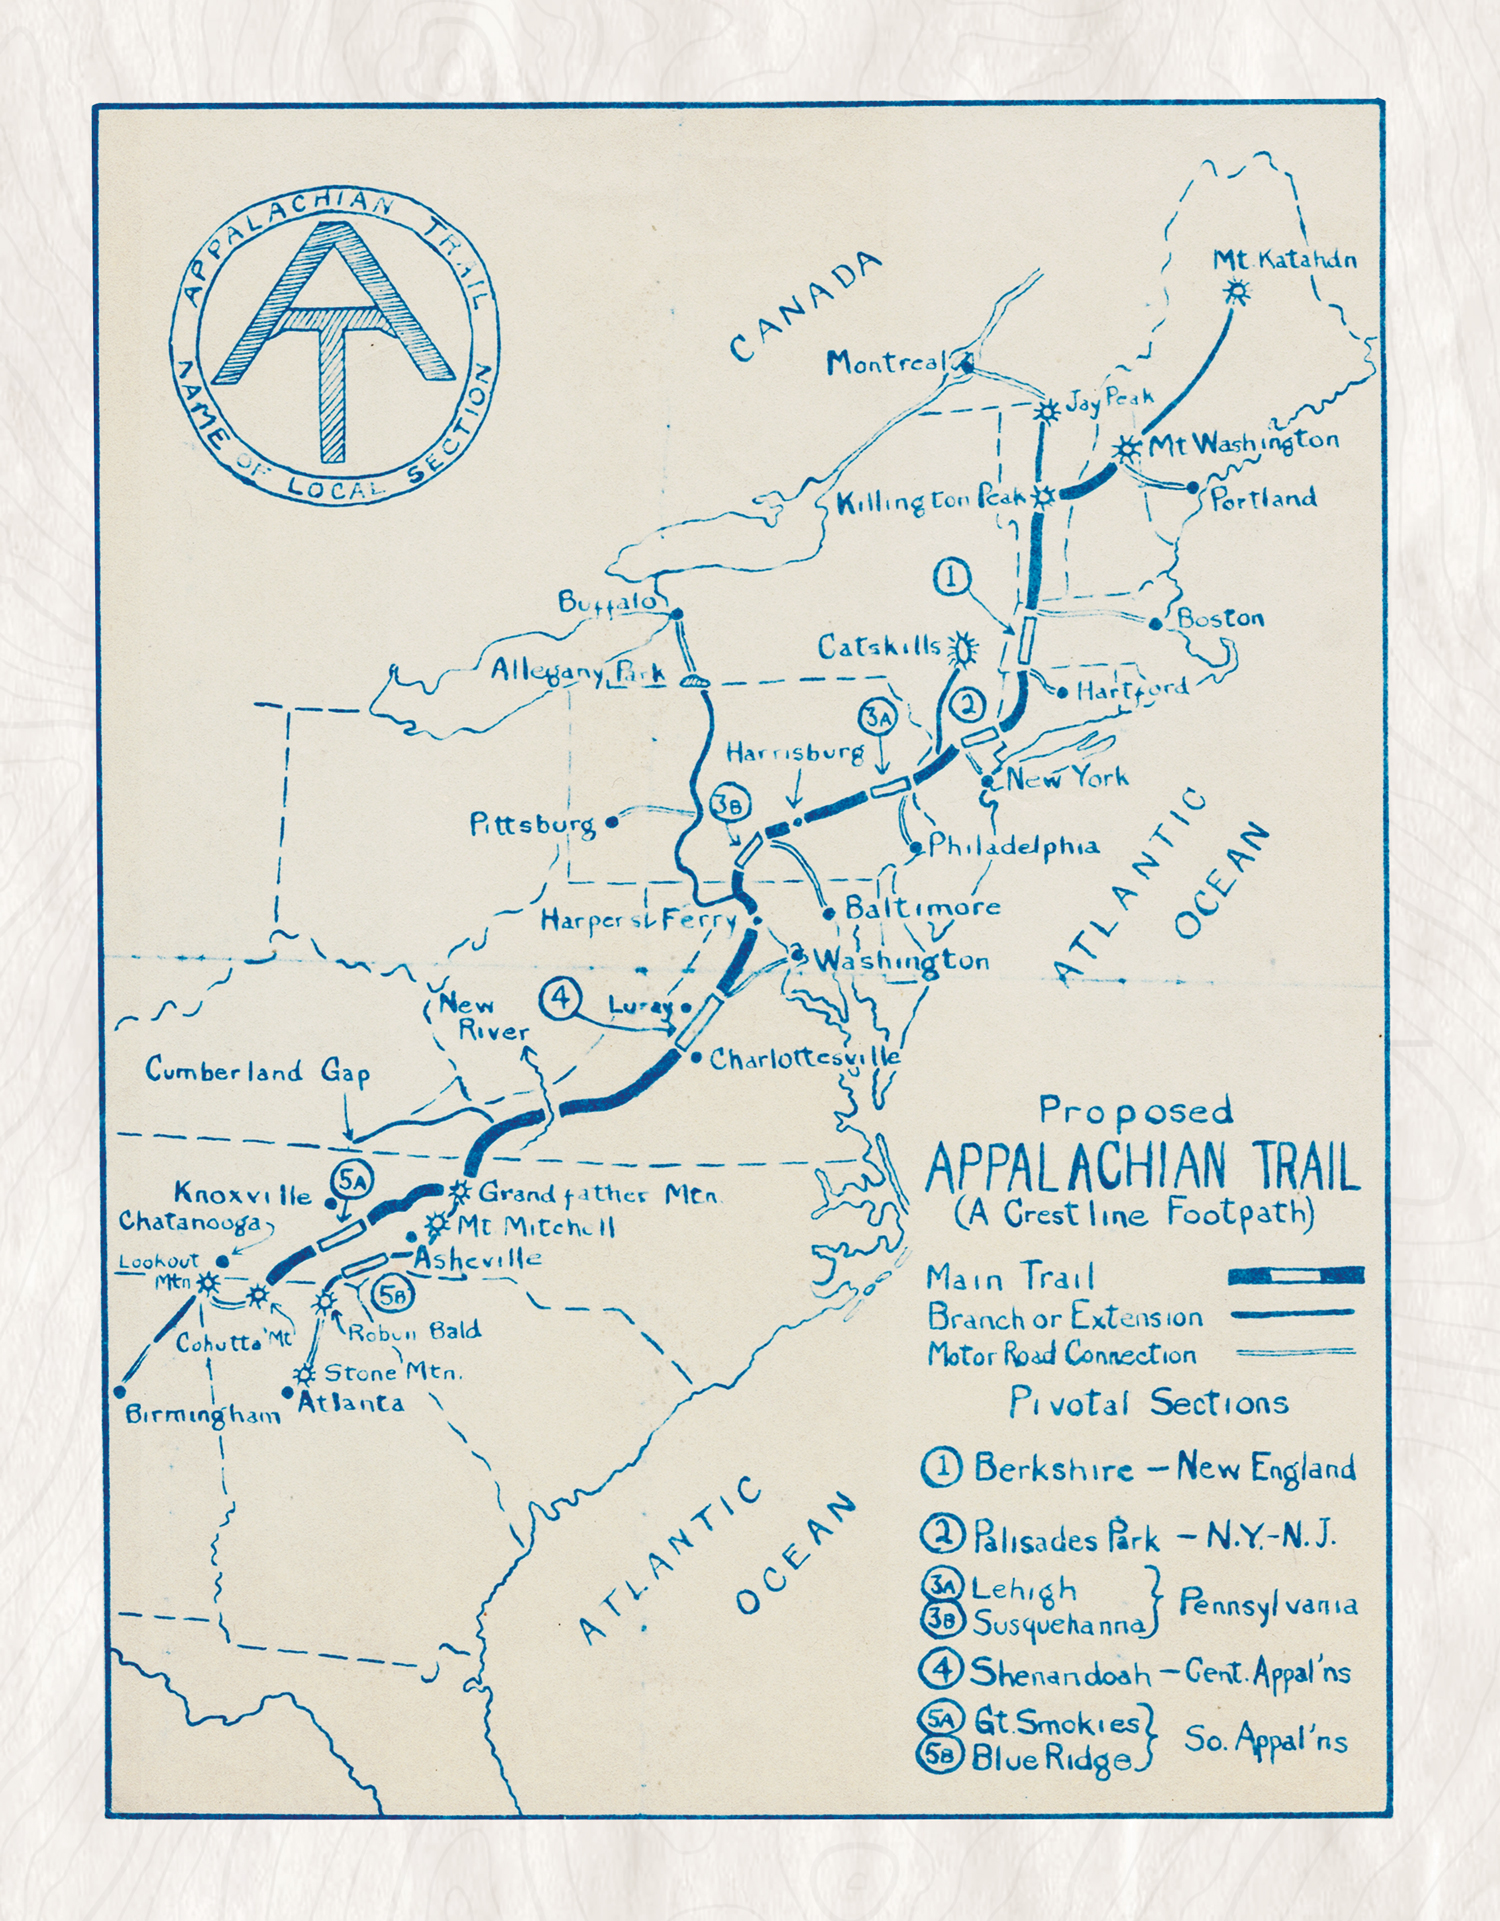 Proposed Appalachian Trail Map